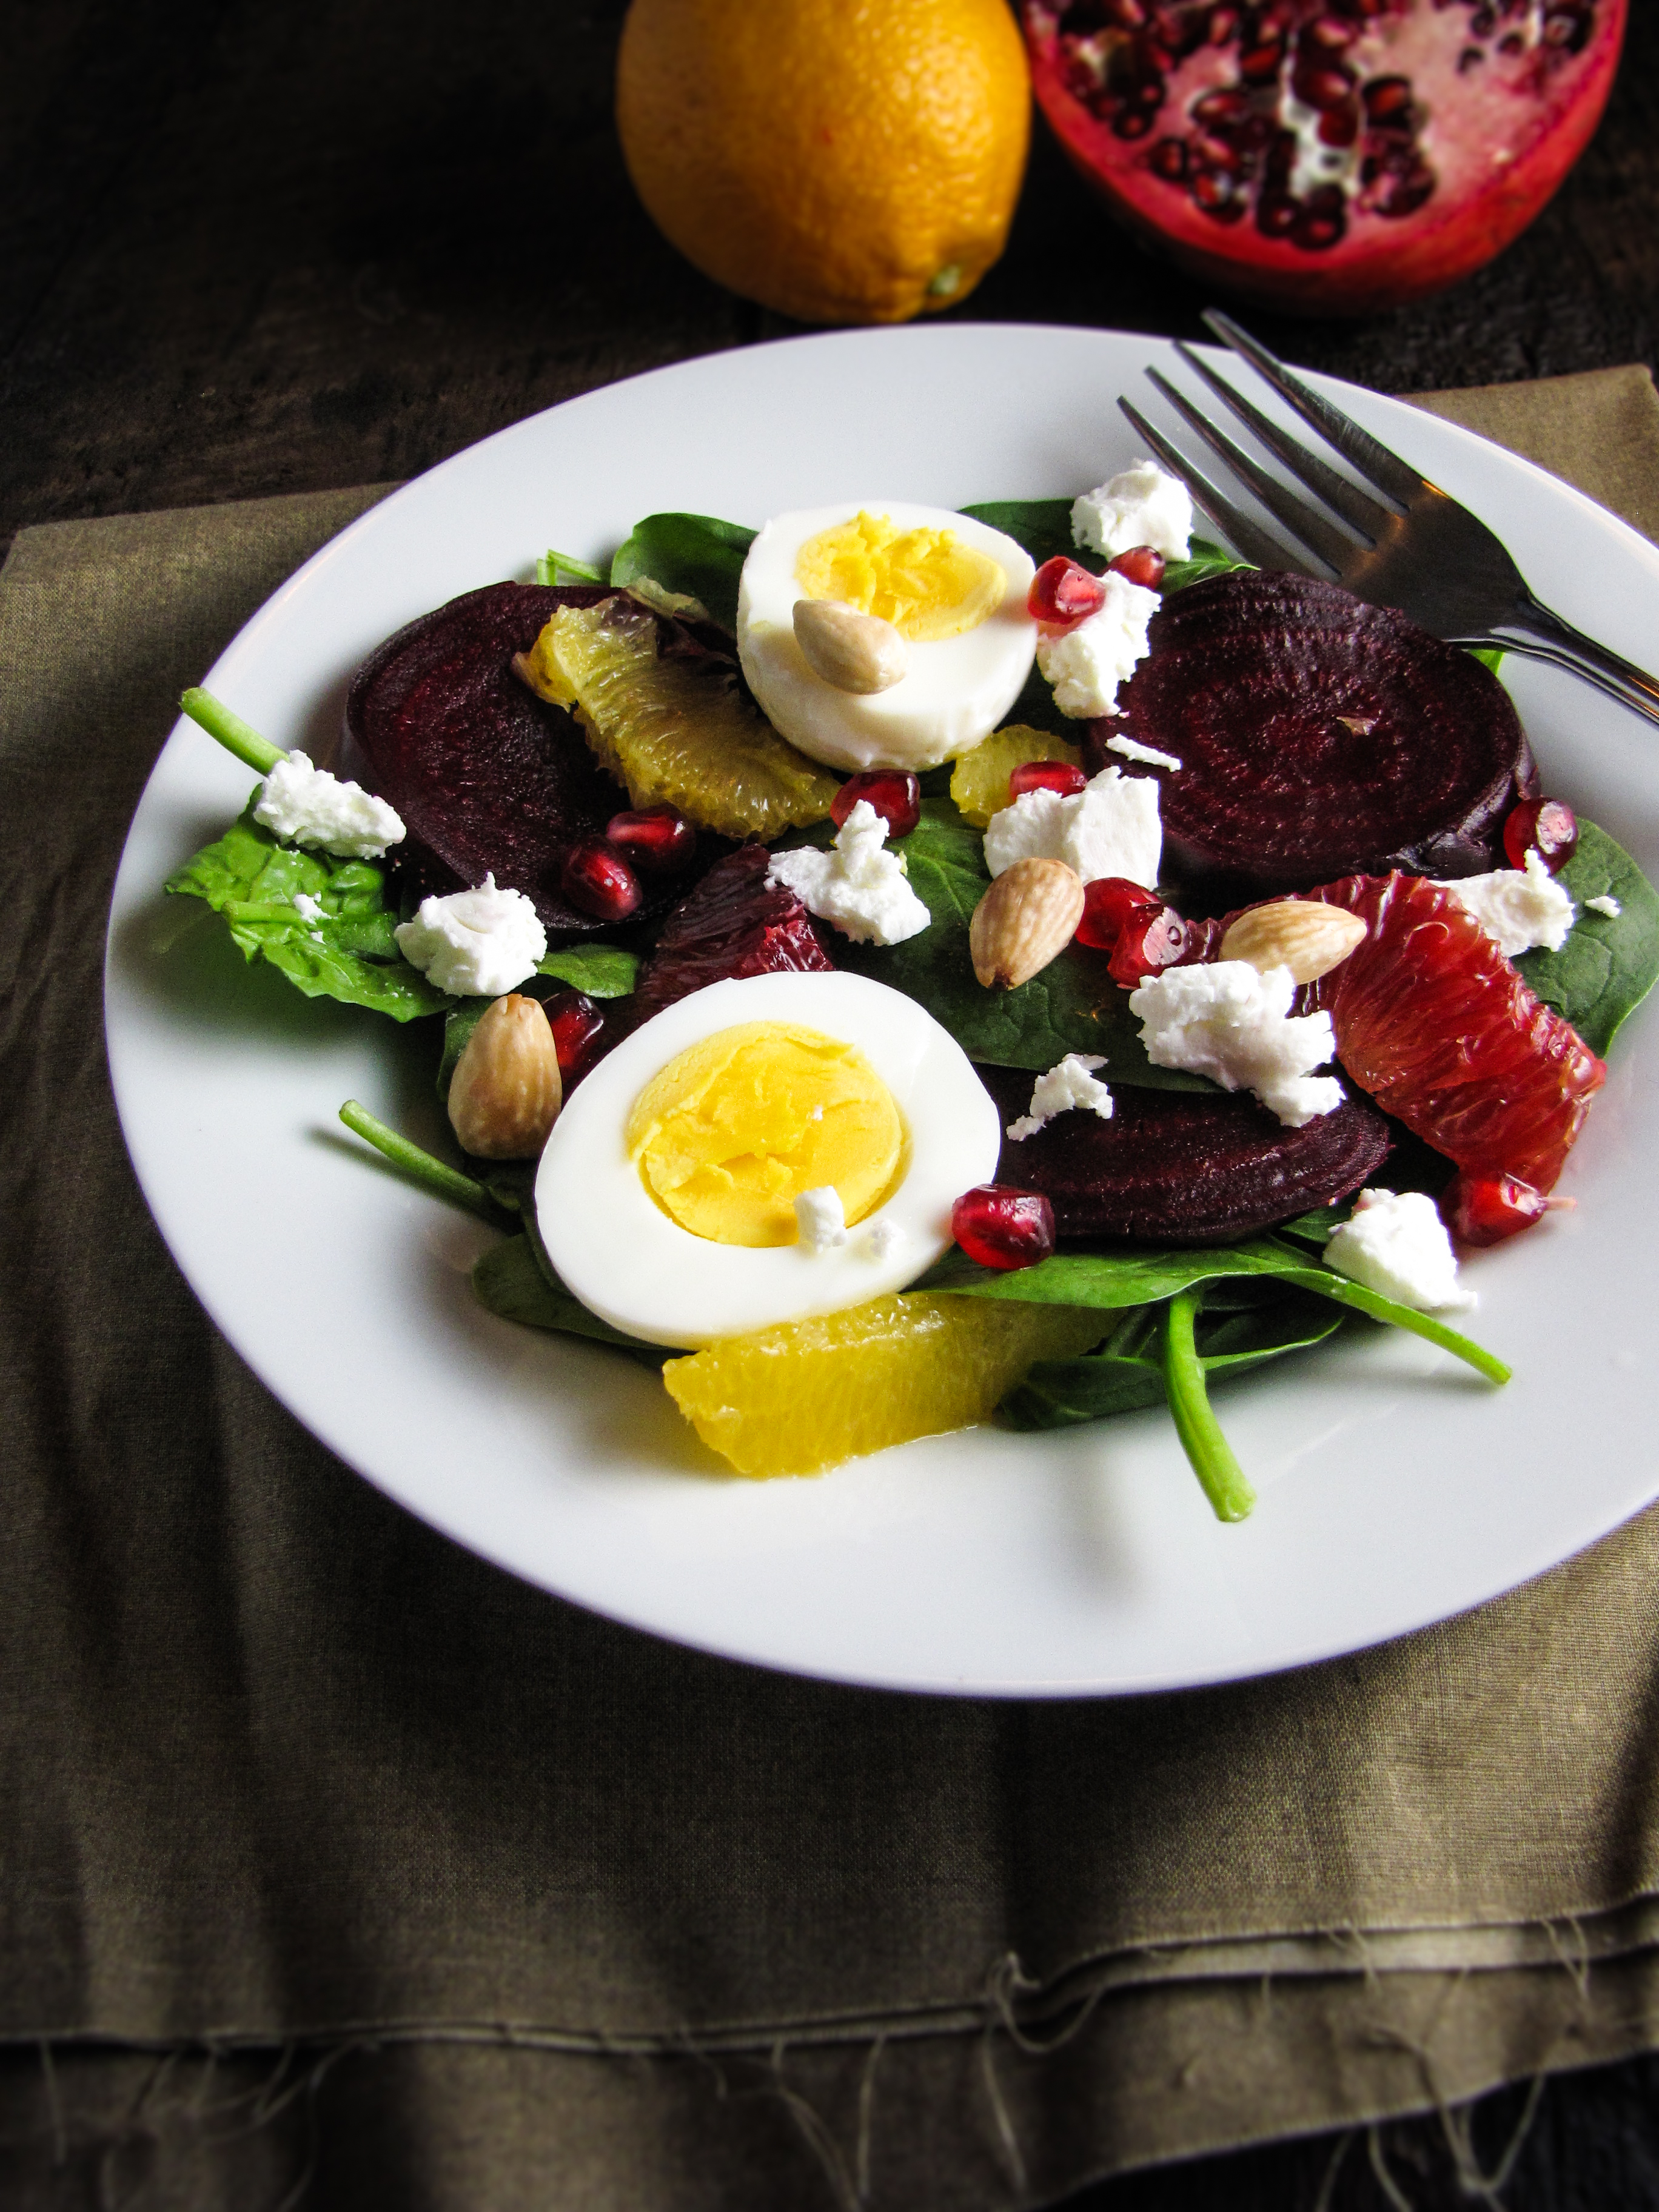 Roasted Beet and Spinach Salad with Eggs, Goat Cheese, Pomegranate, and Orange {Katie at the Kitchen Door}